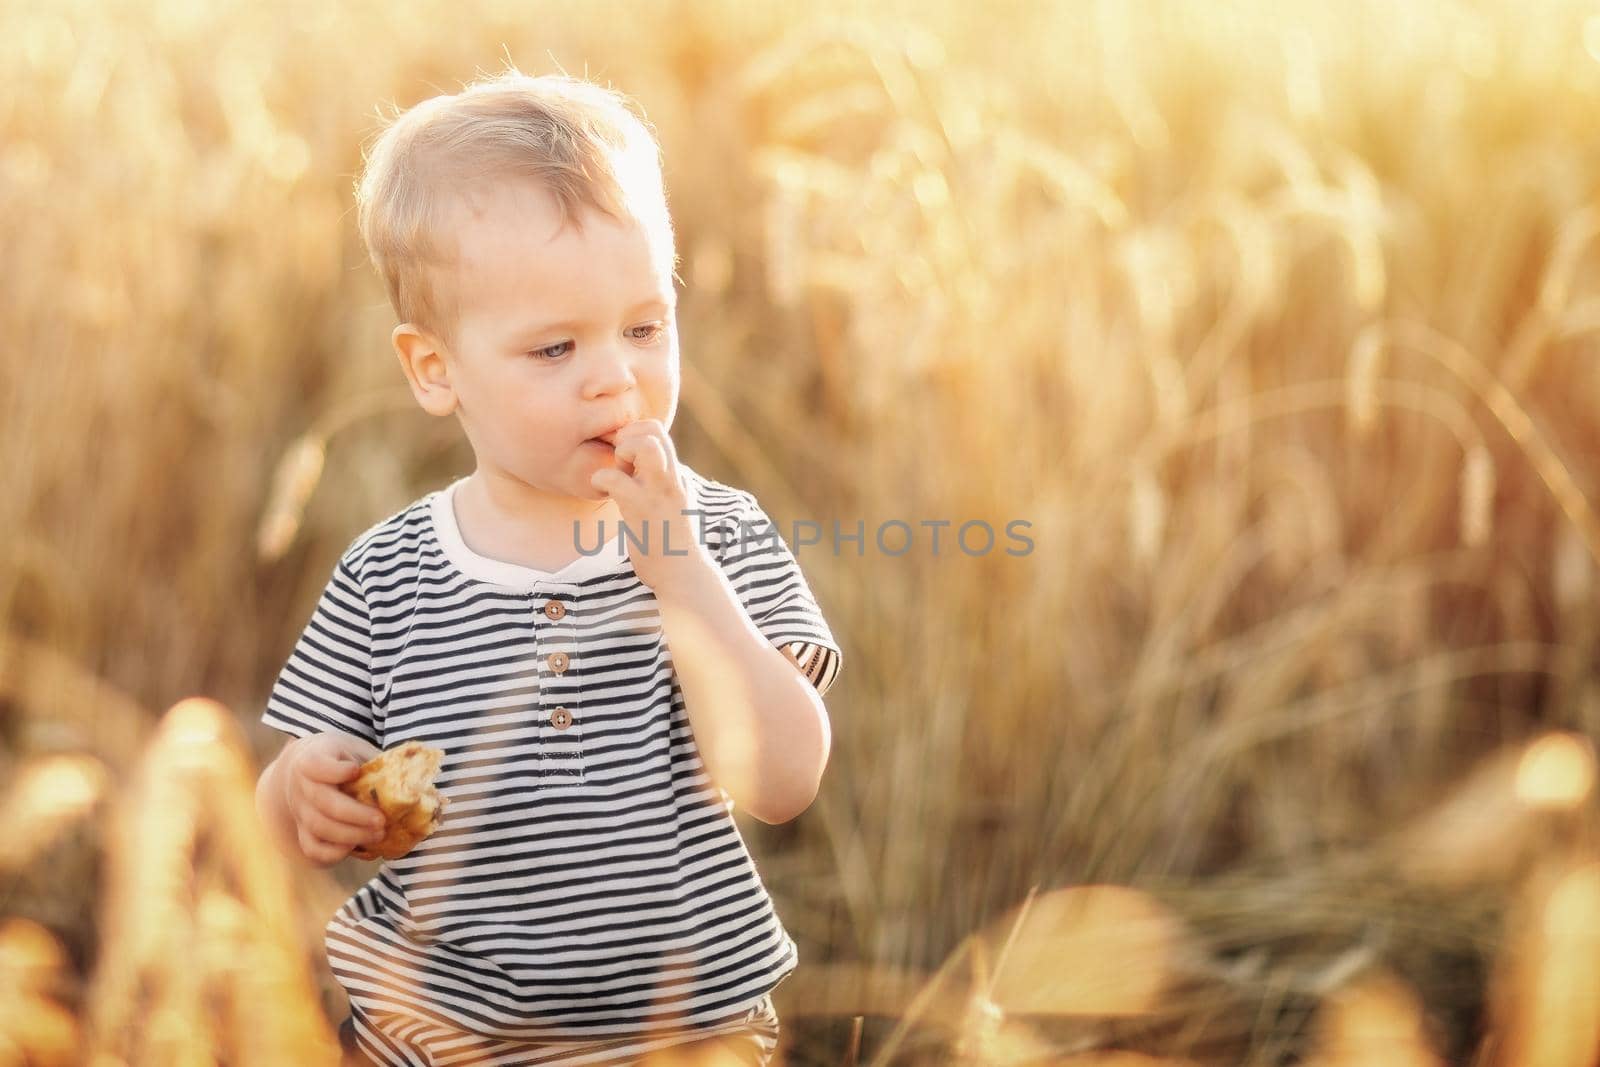 Little country boy eating bread in the wheat field among golden by Lincikas